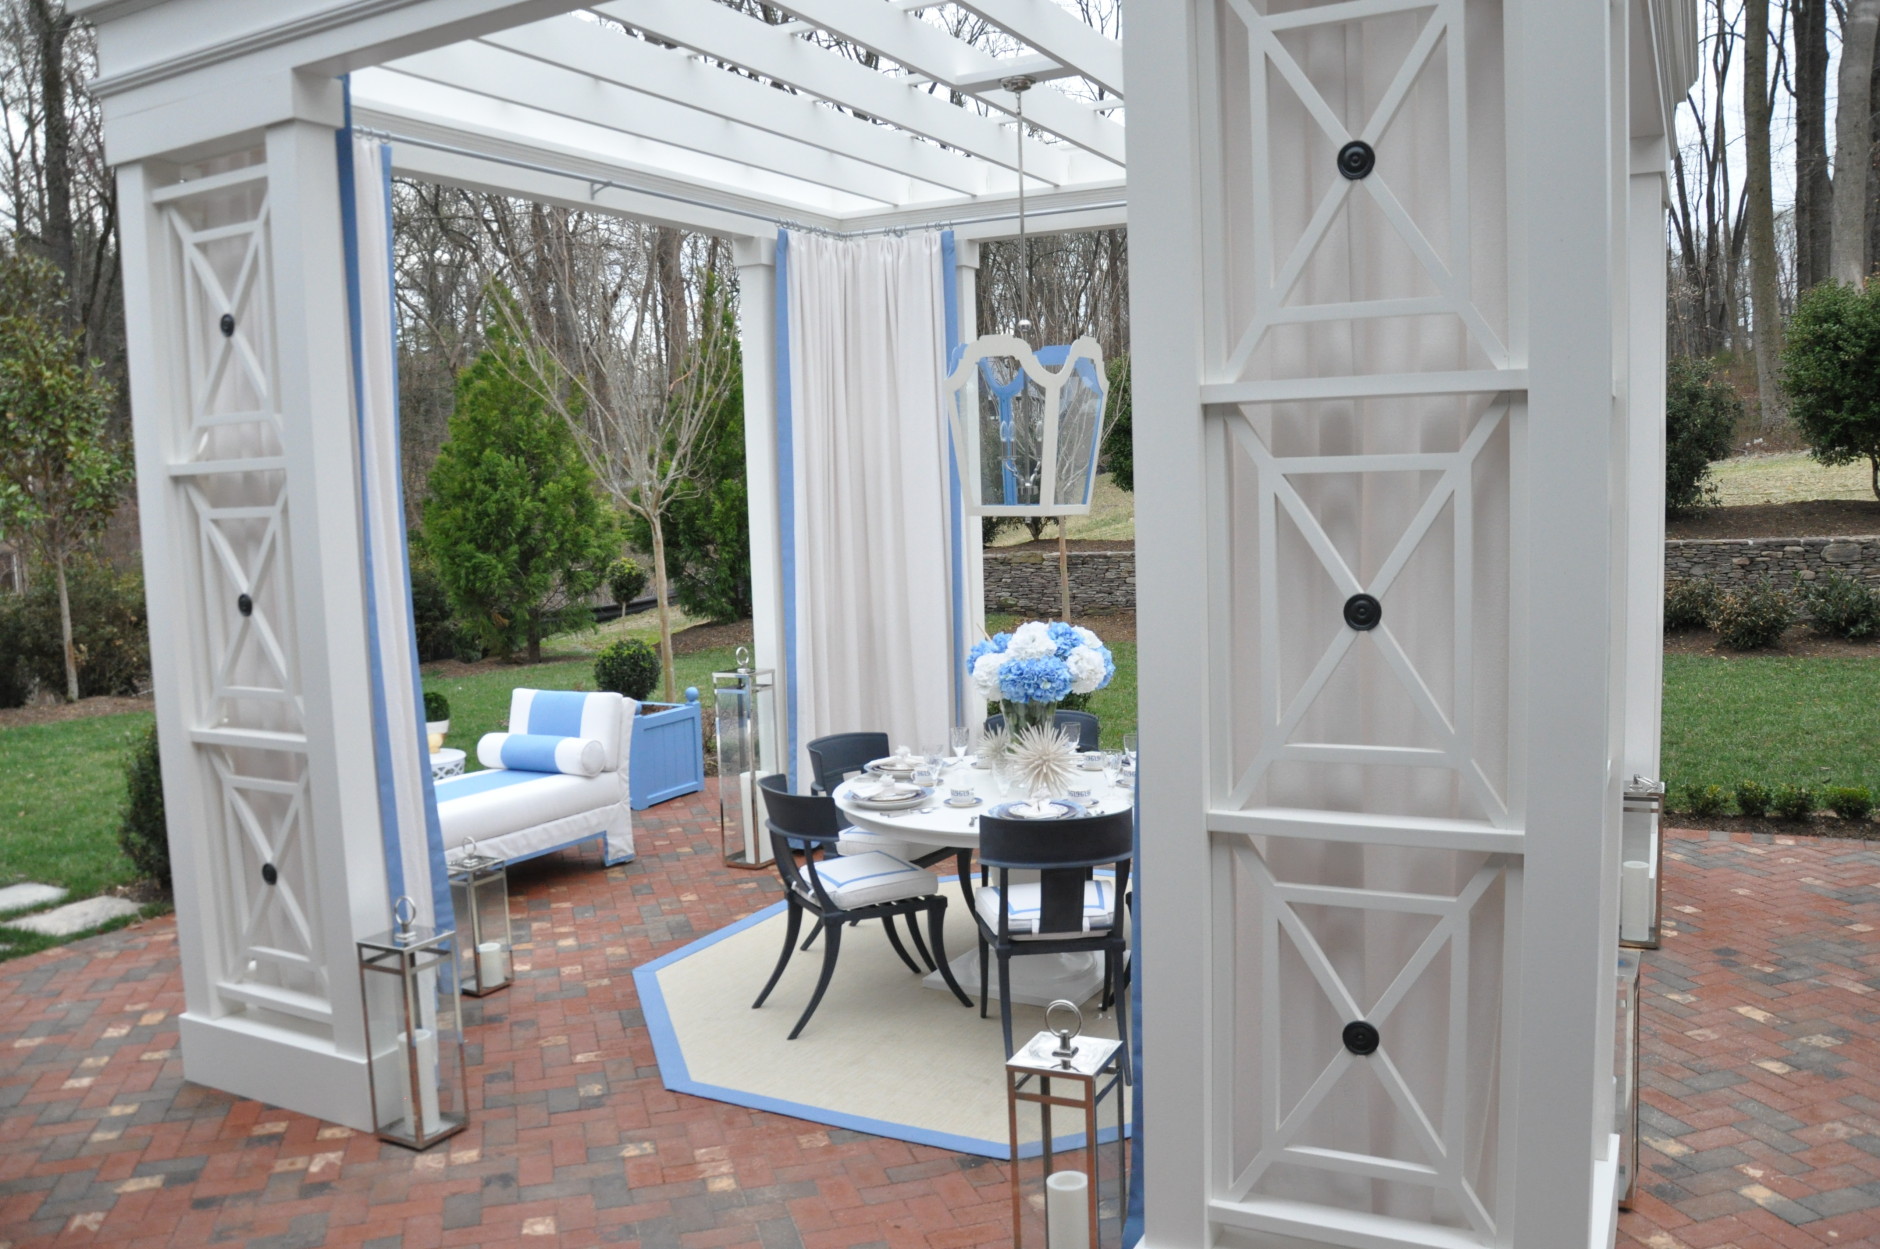 The blue and white color palette of the outdoor patio complements the natural greens of the outdoors, Sroka says. (WTOP/Rachel Nania) 